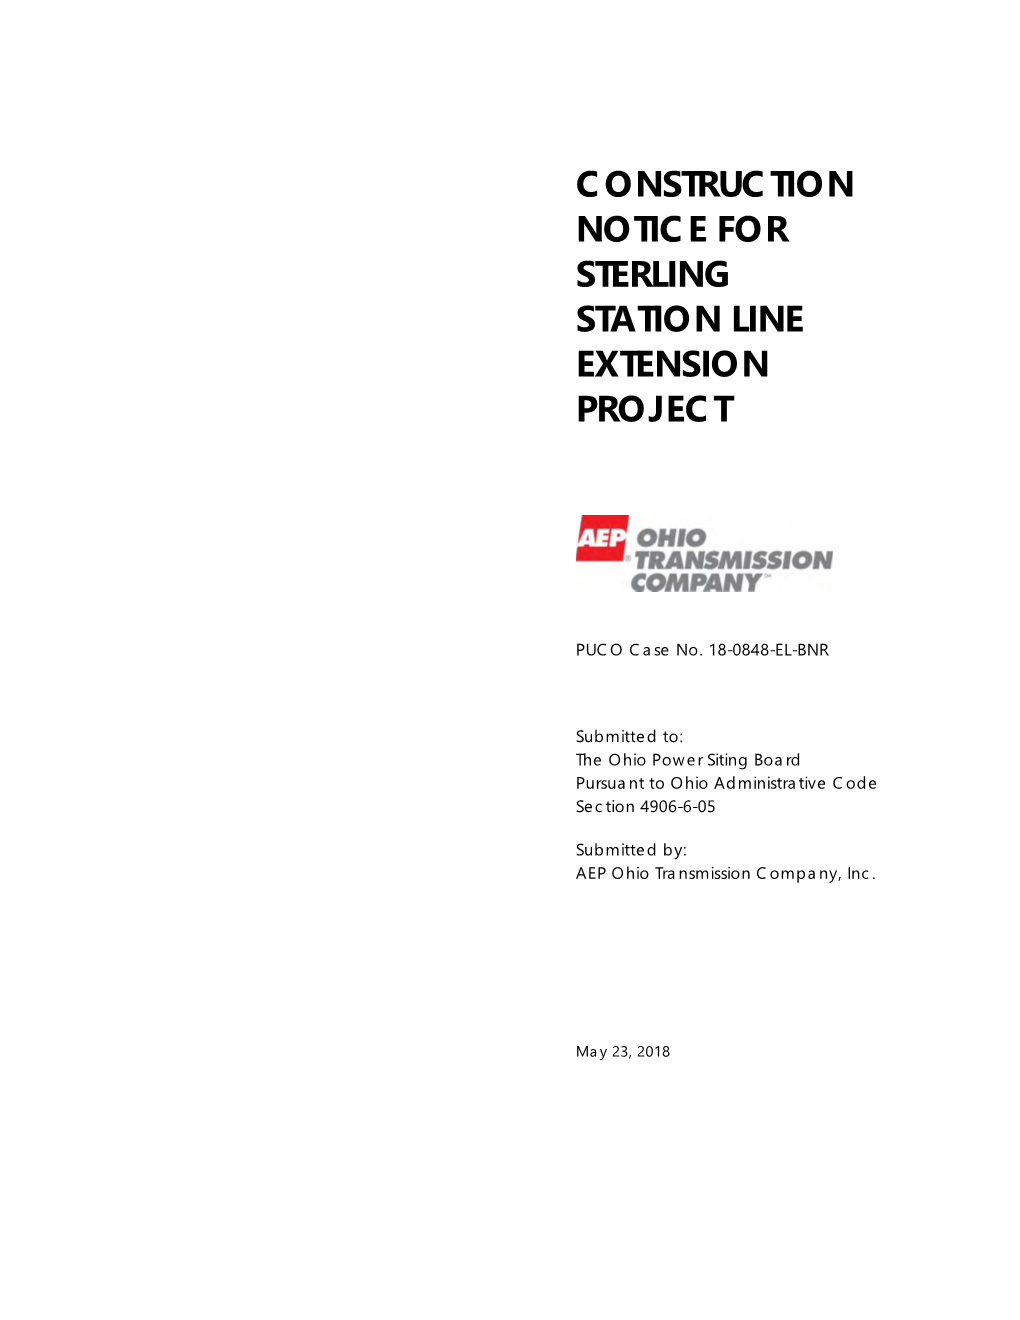 Construction Notice for Sterling Station Line Extension Project